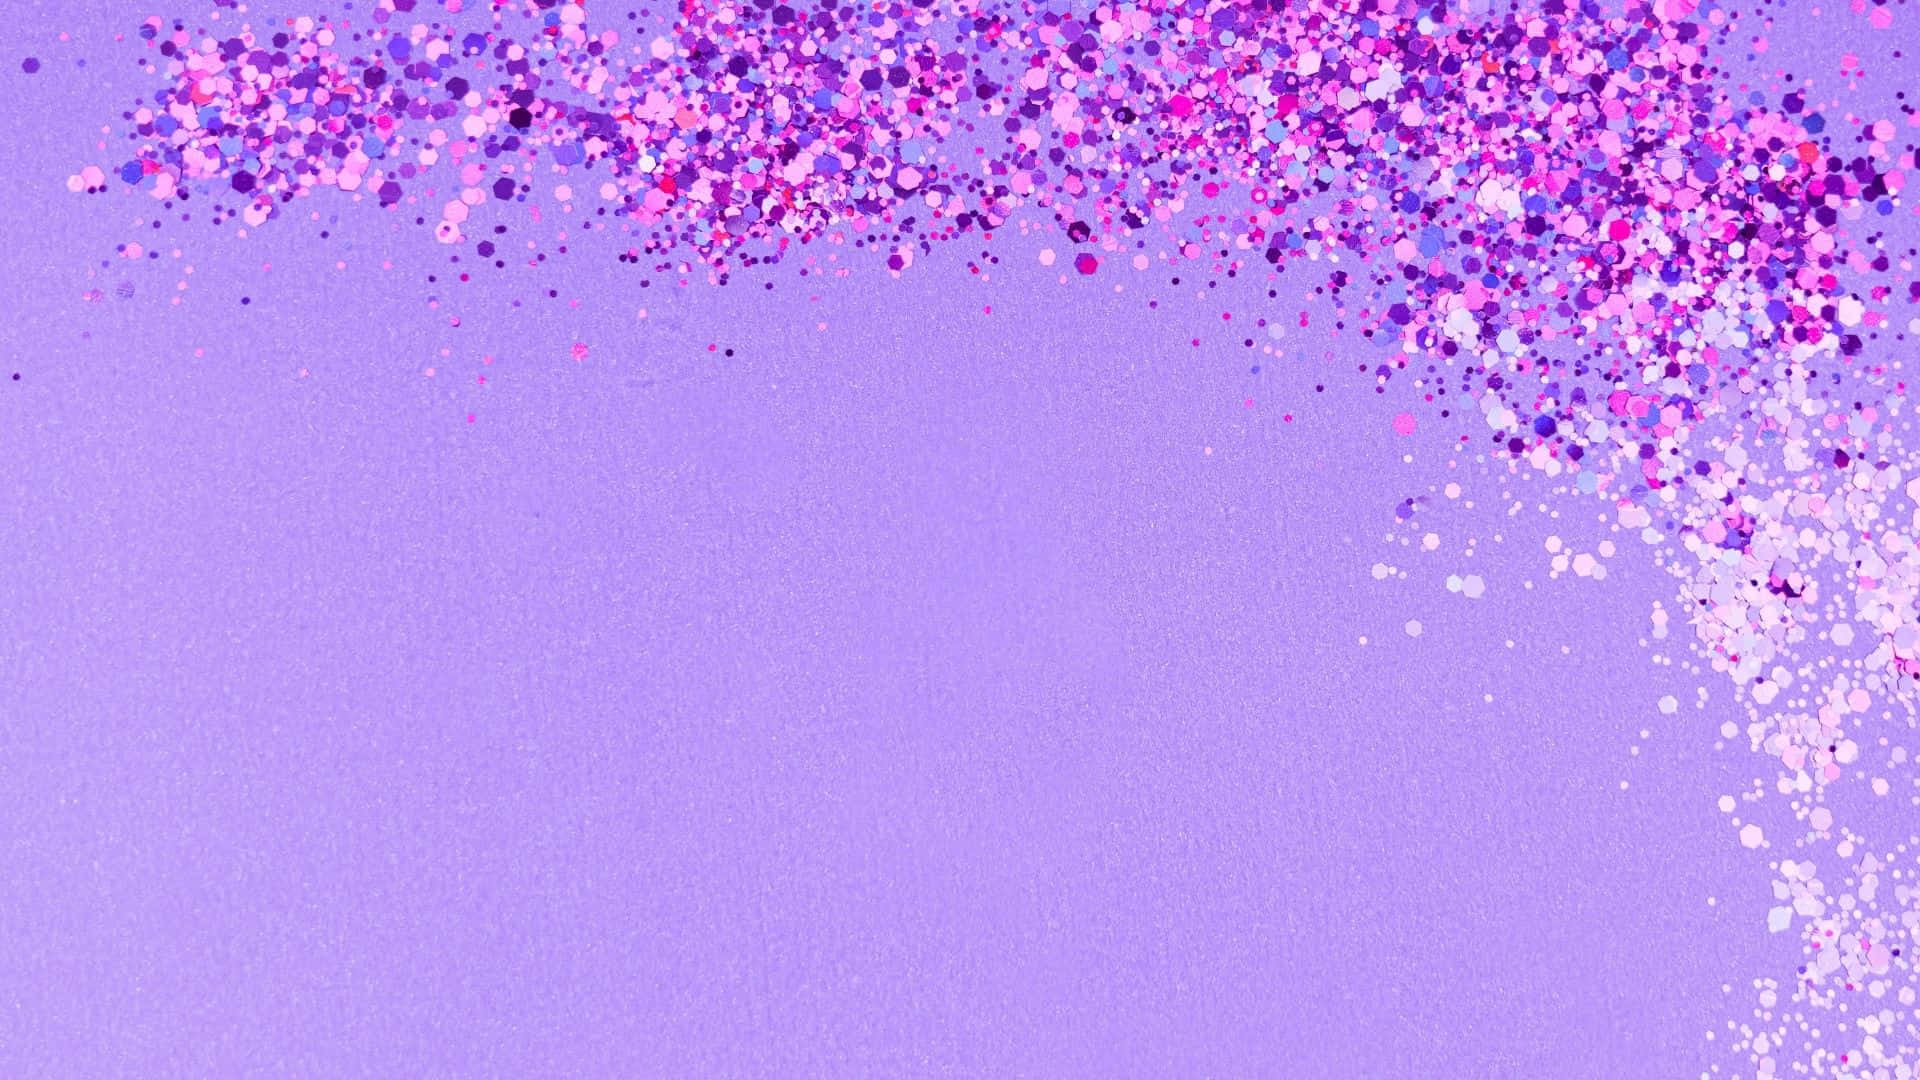 Magical purple glitter dots speckled throughout Wallpaper